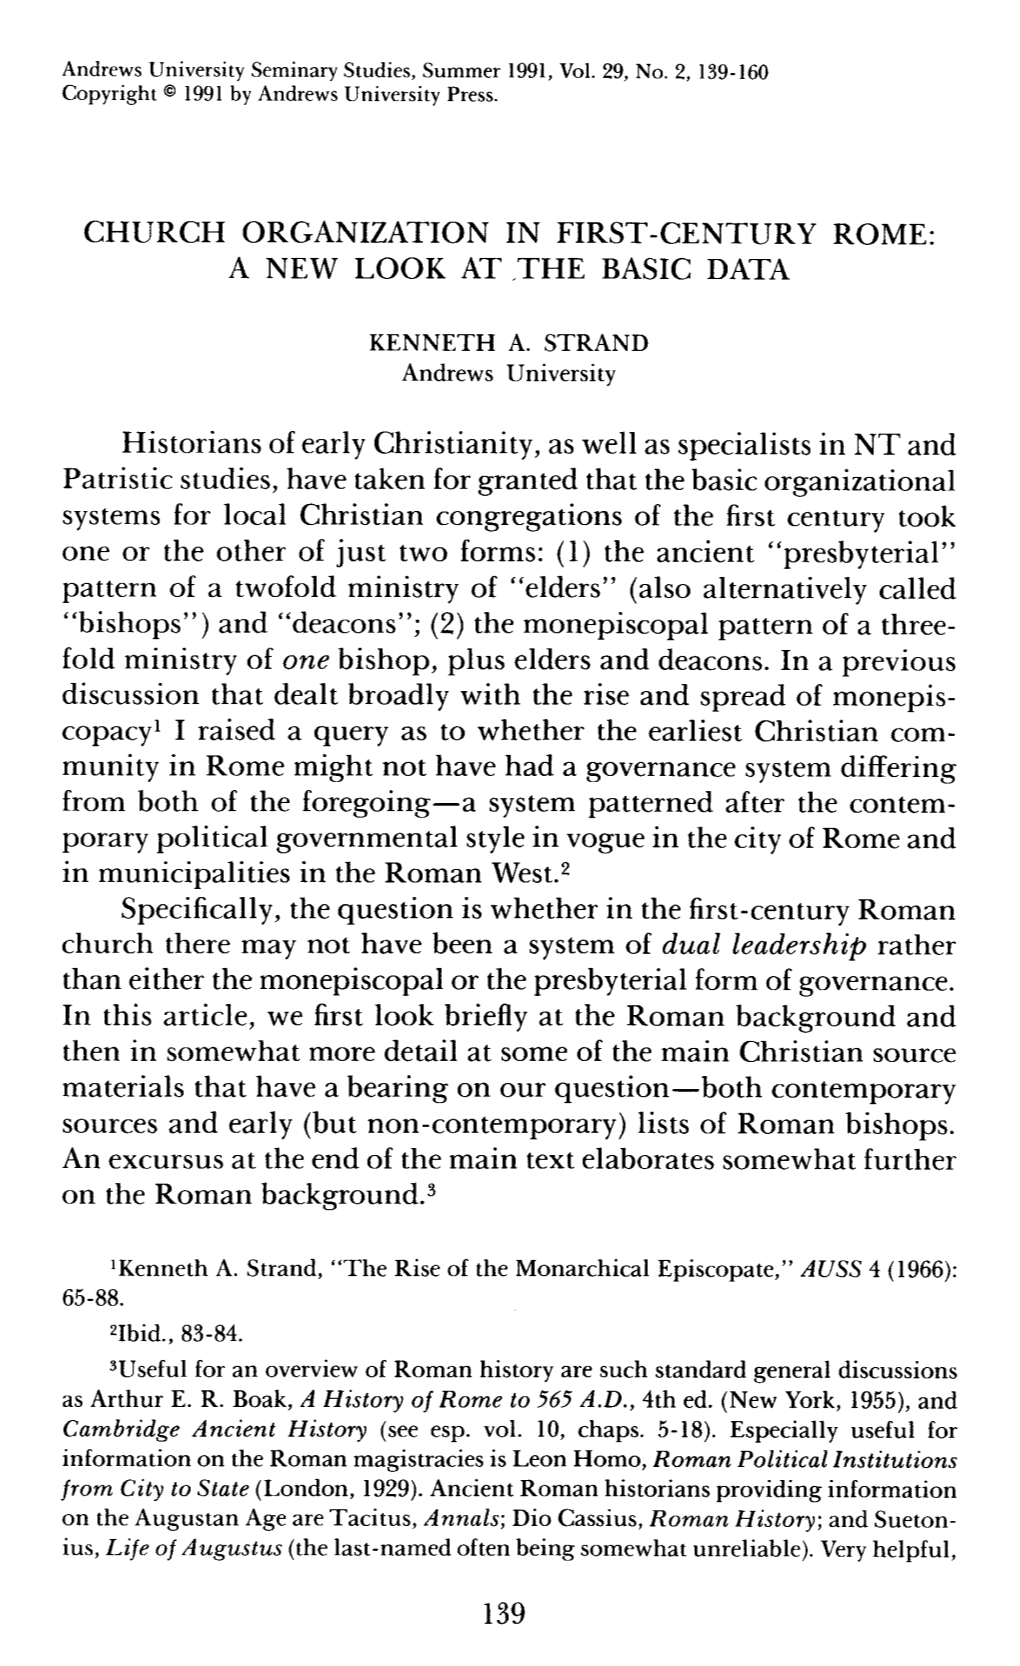 Church Organization in First-Century Rome: a New Look at ,The Basic Data